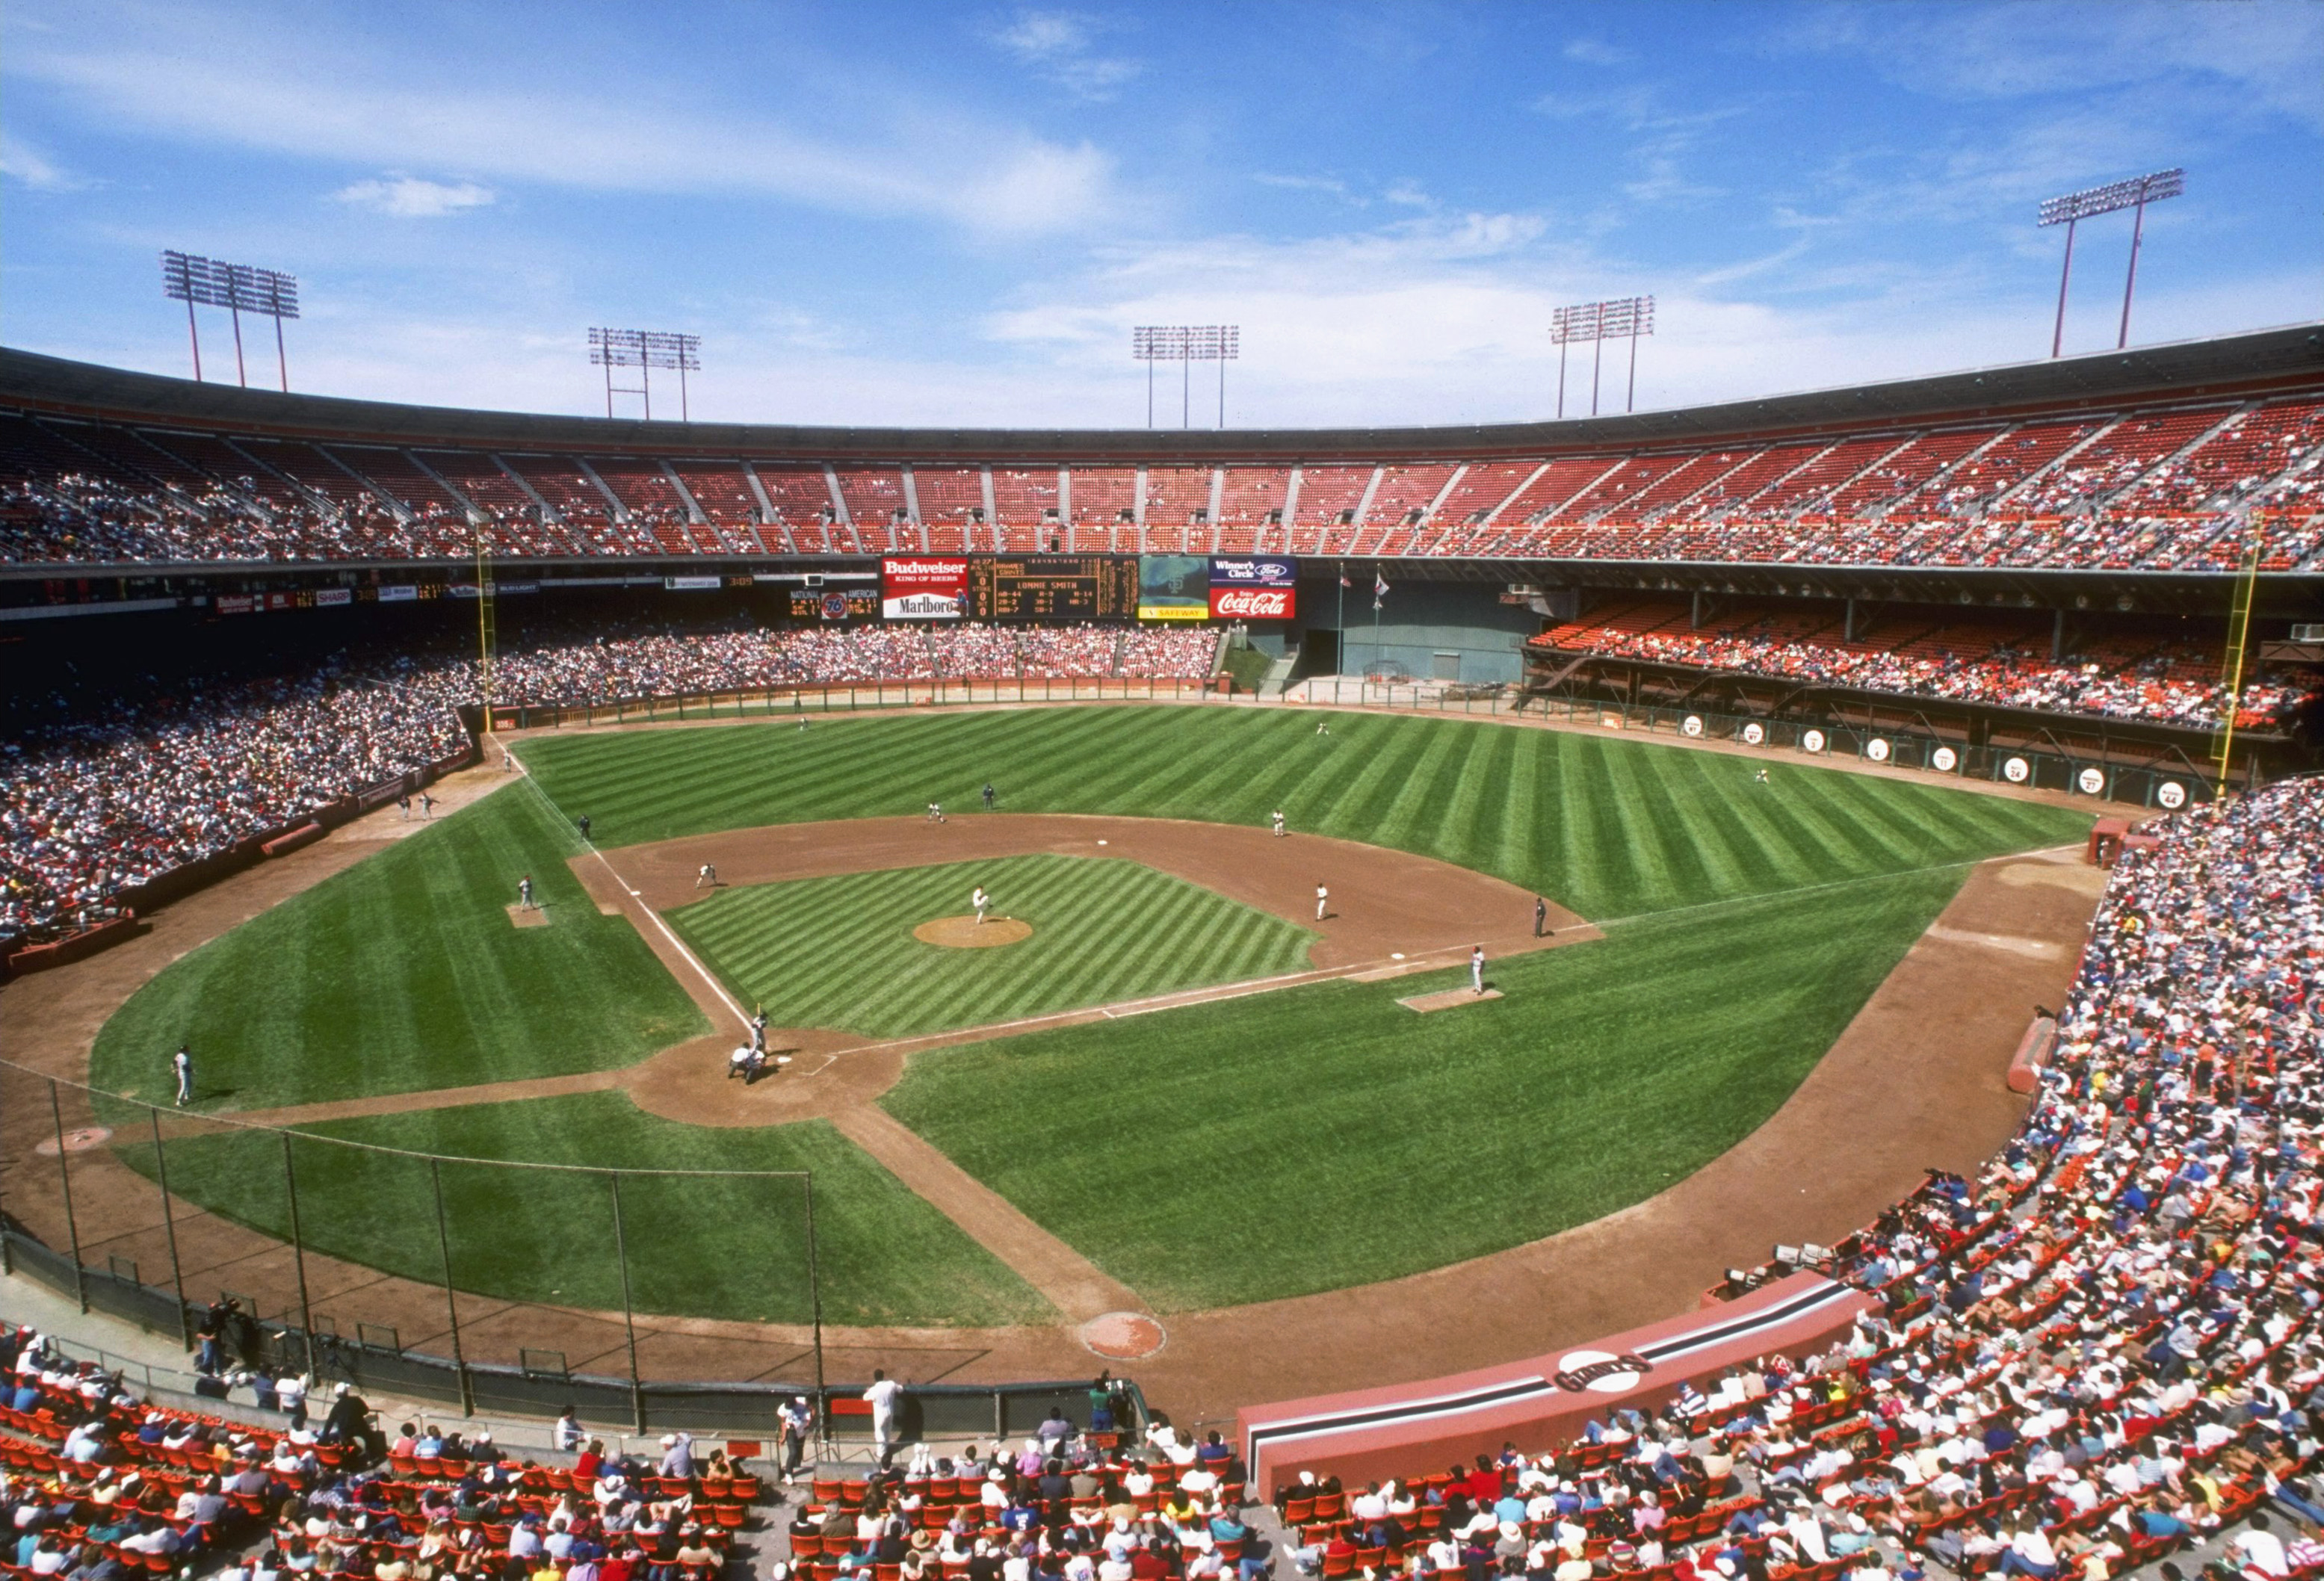 General view of Candlestick Park